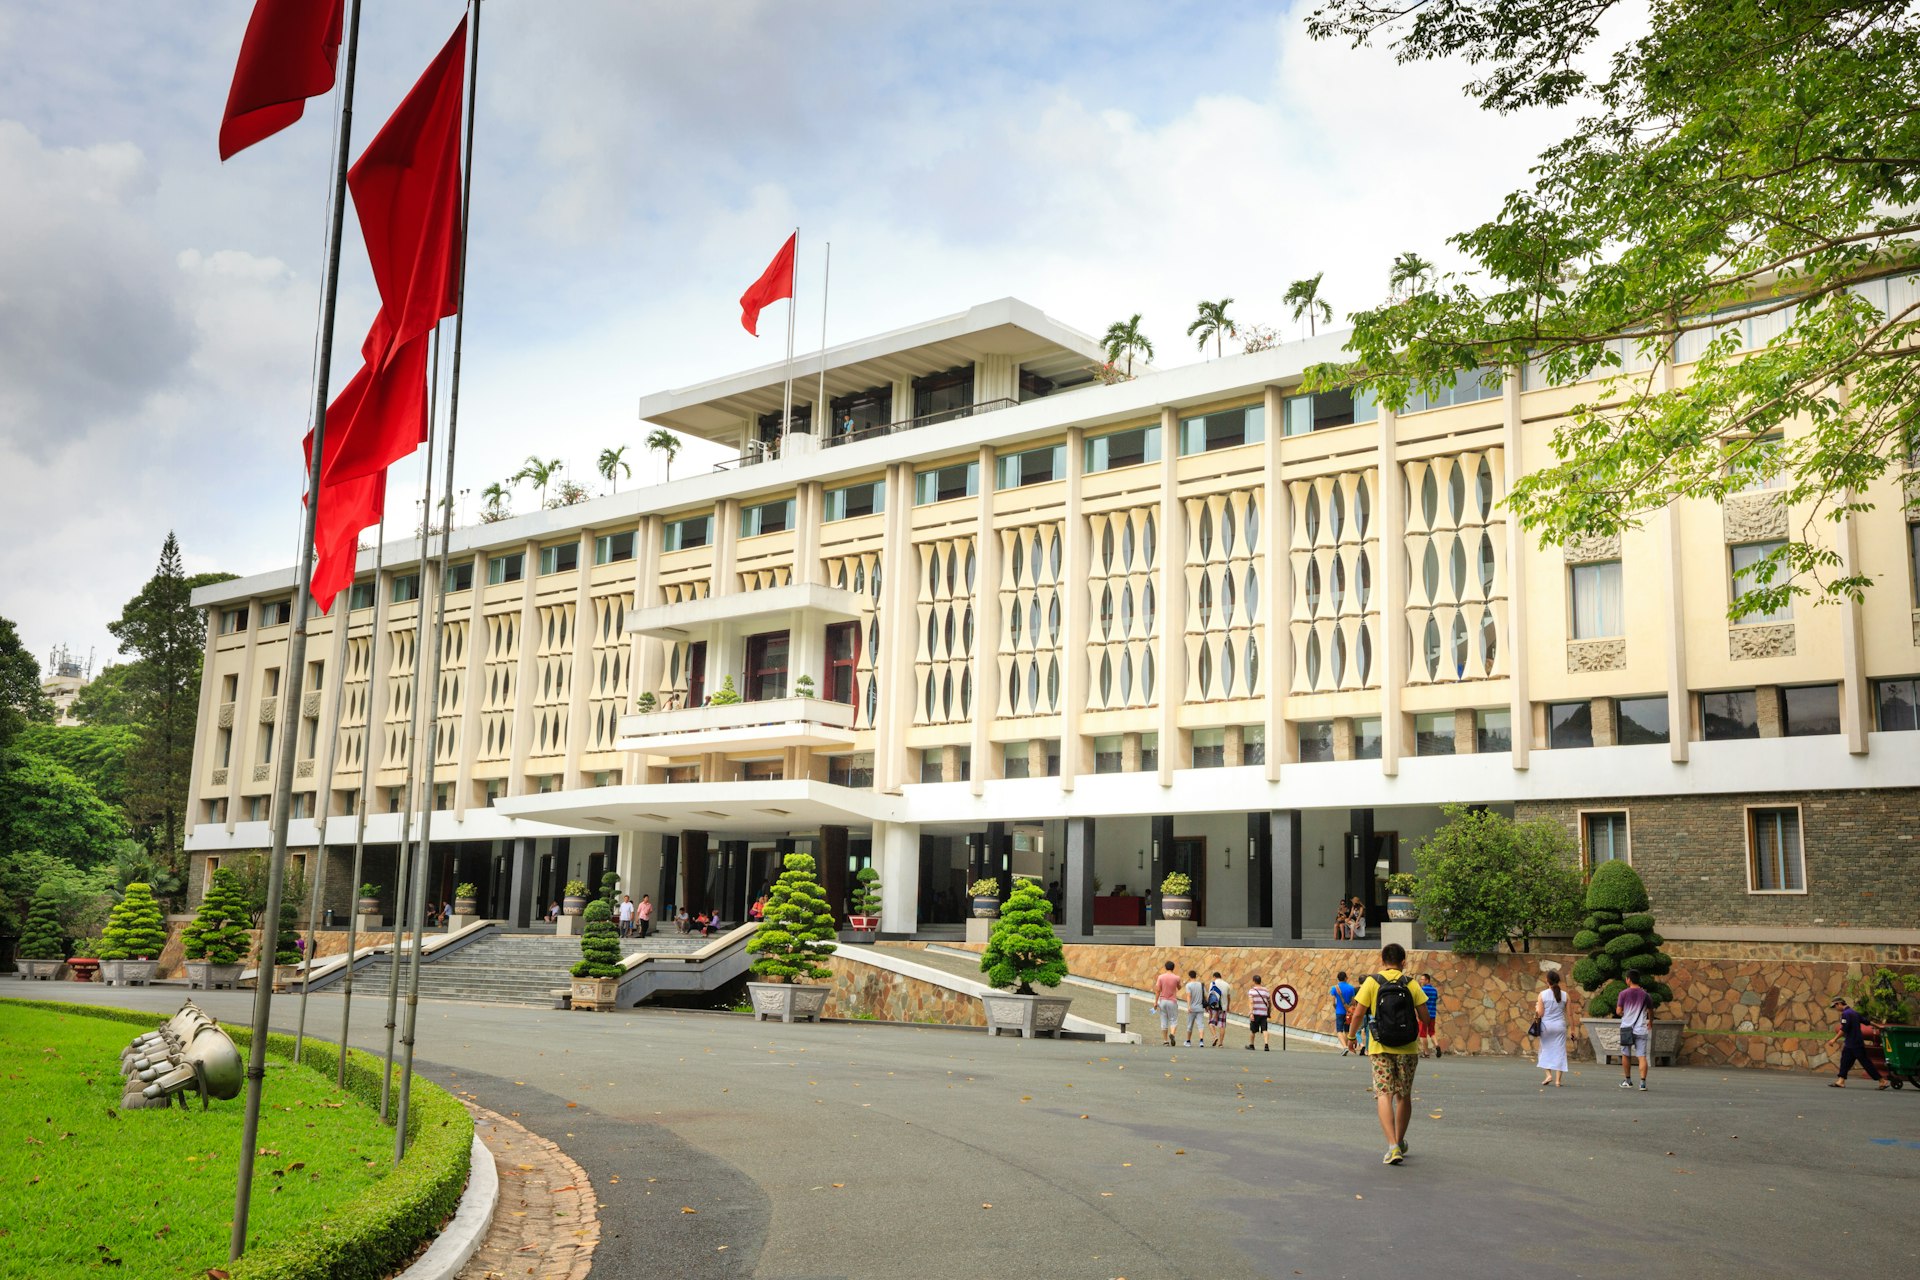 A tourist walks along the path towards the Reunification Palace in Ho Chi Minh City with Vietnamese flags flapping in the wind